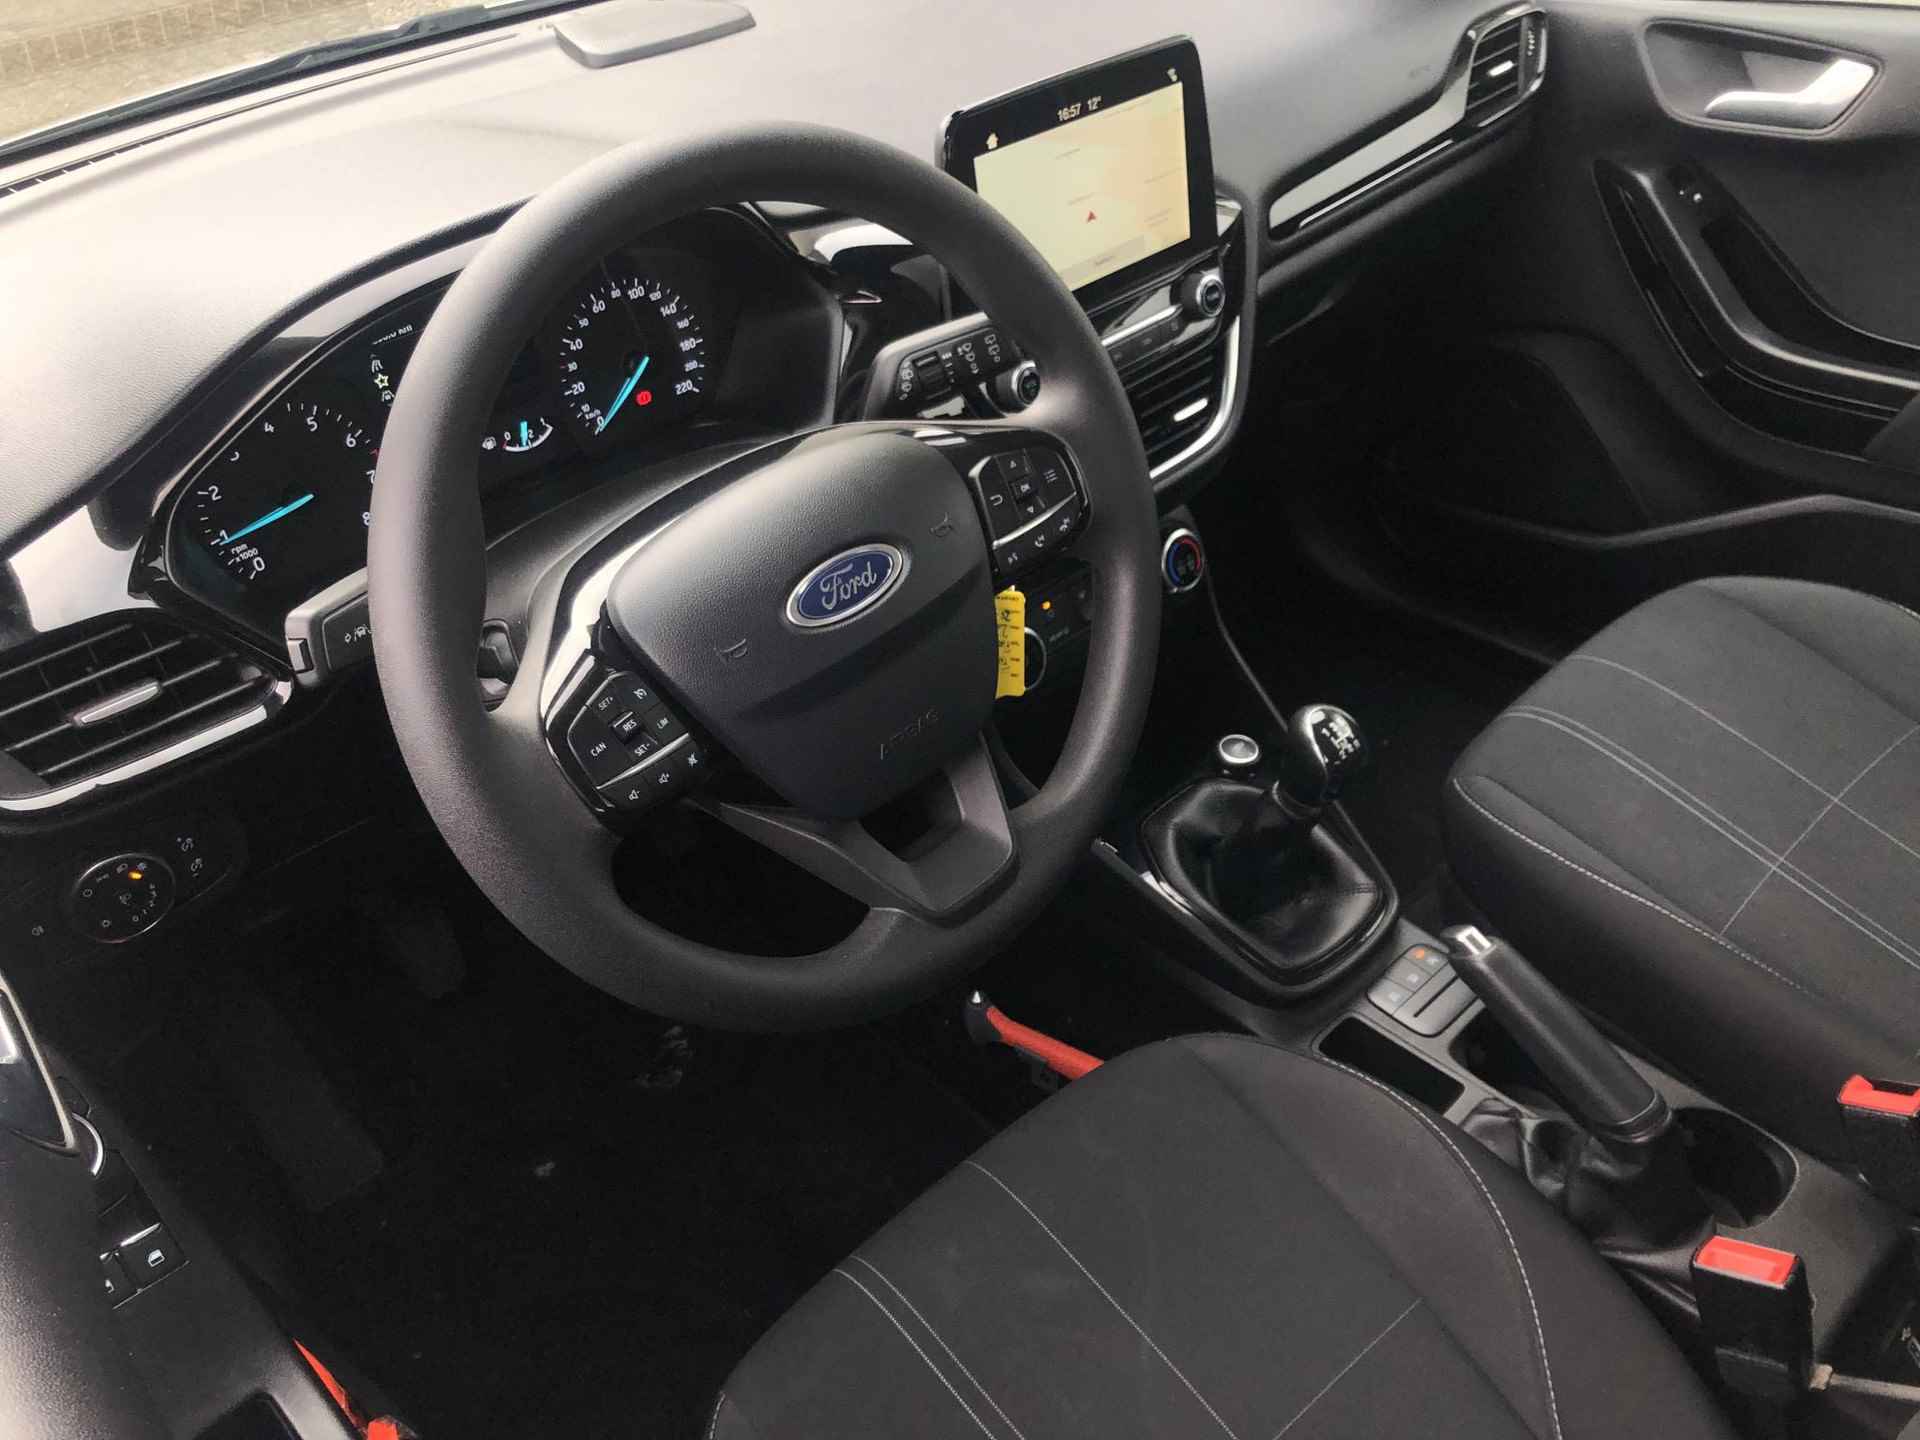 Ford Fiesta 1.1 85pk Trend l Navigatie l Apple Carplay/Android Auto l Airconditioning l Cruise control - 12/23